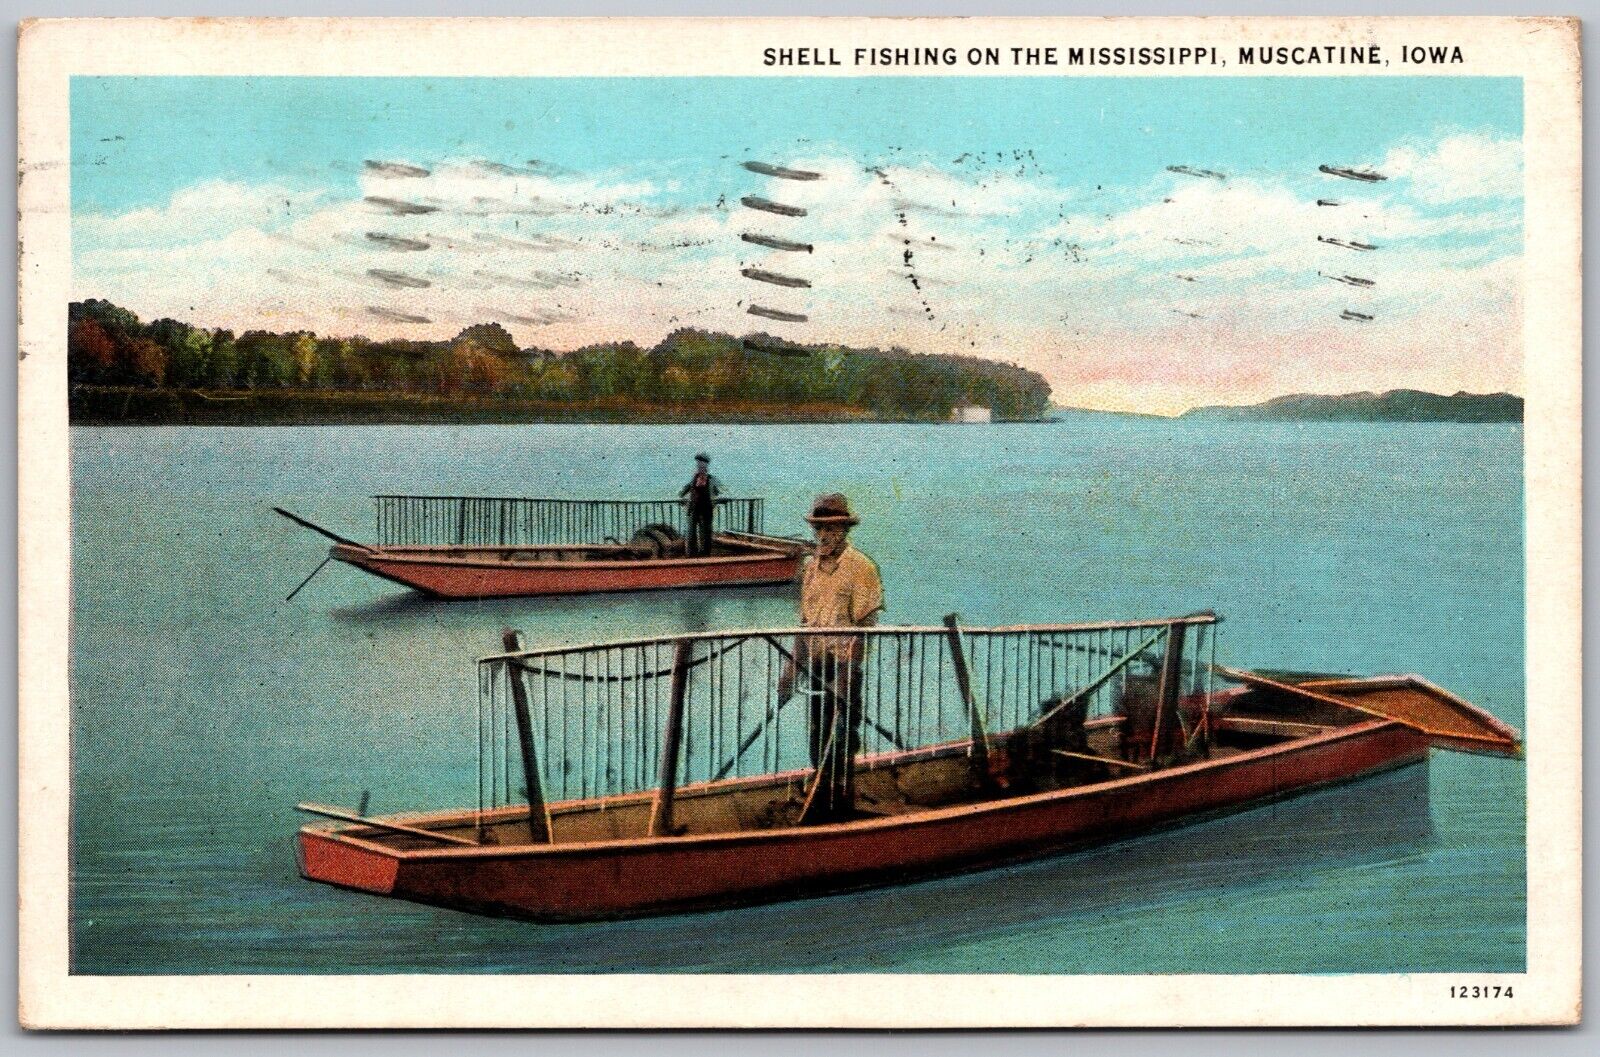 SHELL FISHING ON THE MISSISSIPPI.  MUSCATINE, IOWA  123174  1928  Postcard  16